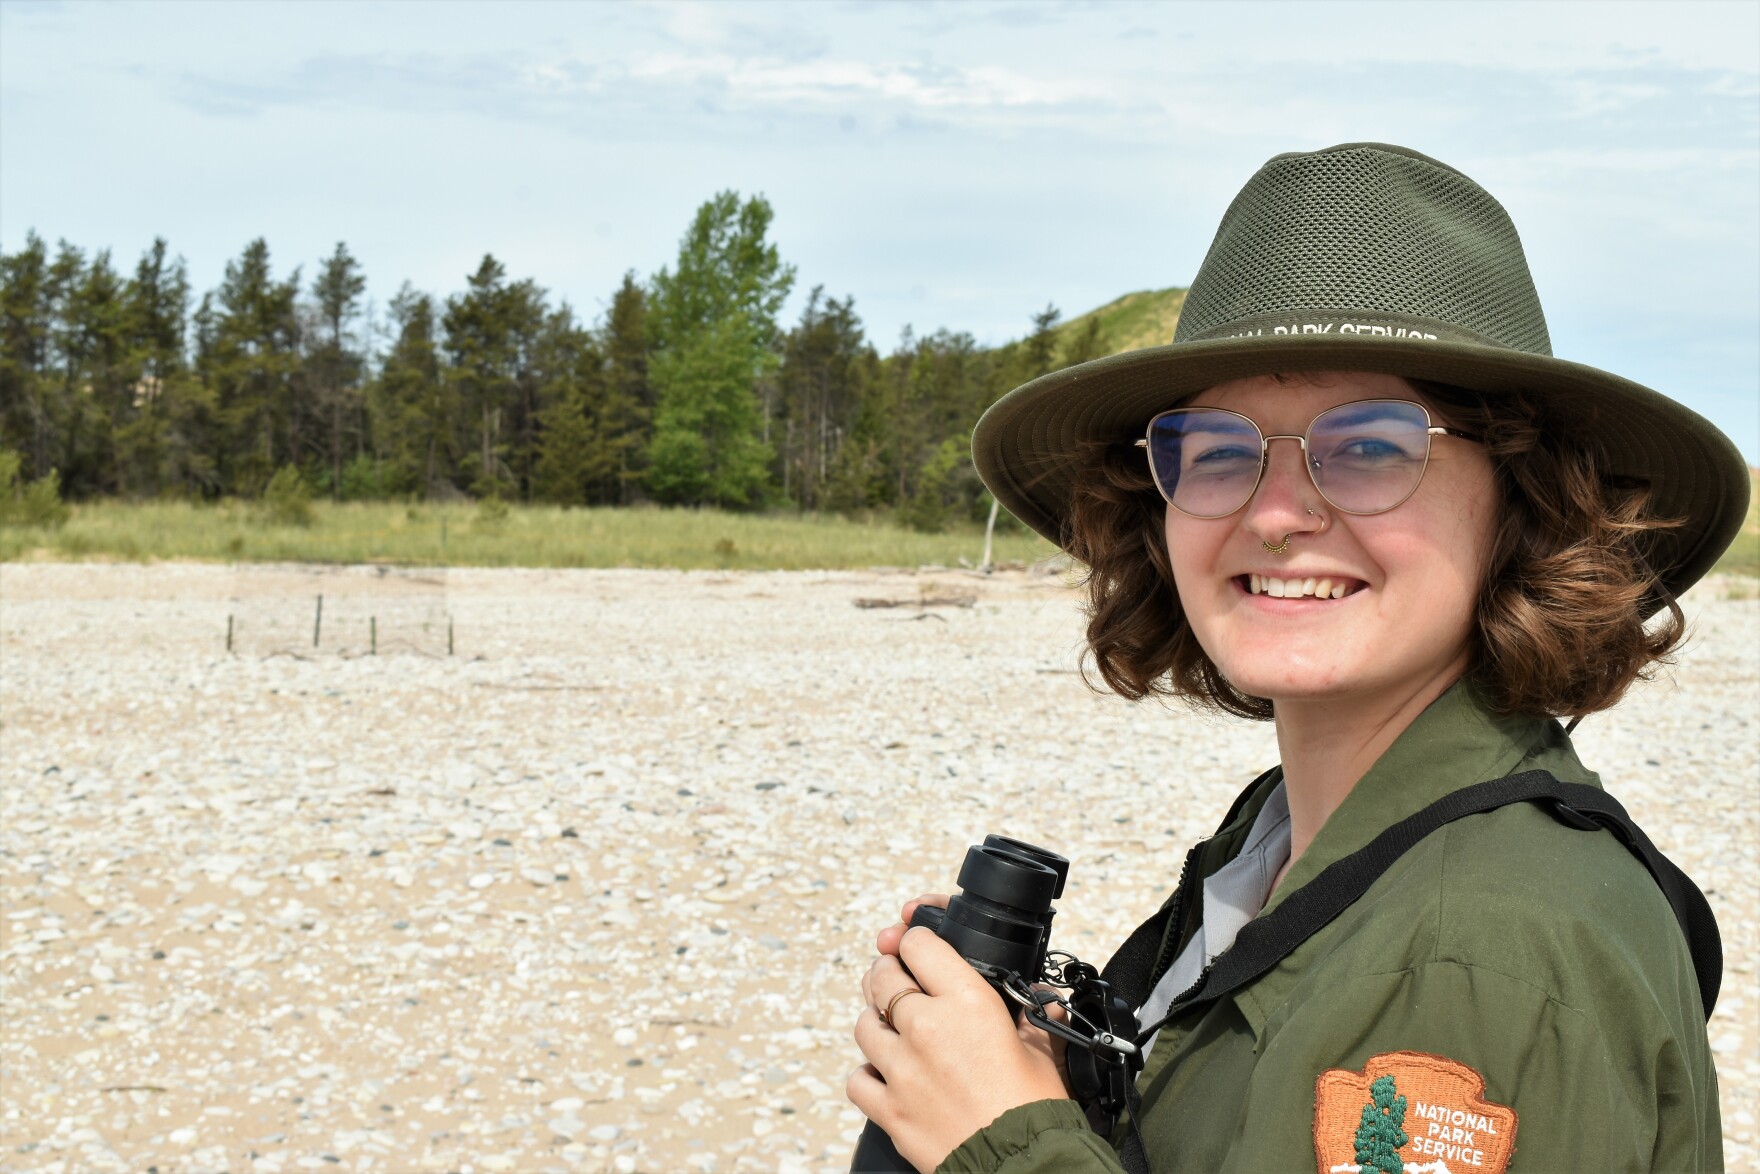 a younger white person wearing a national park service uniform smiles at the camera while holding bincolulars on the beach